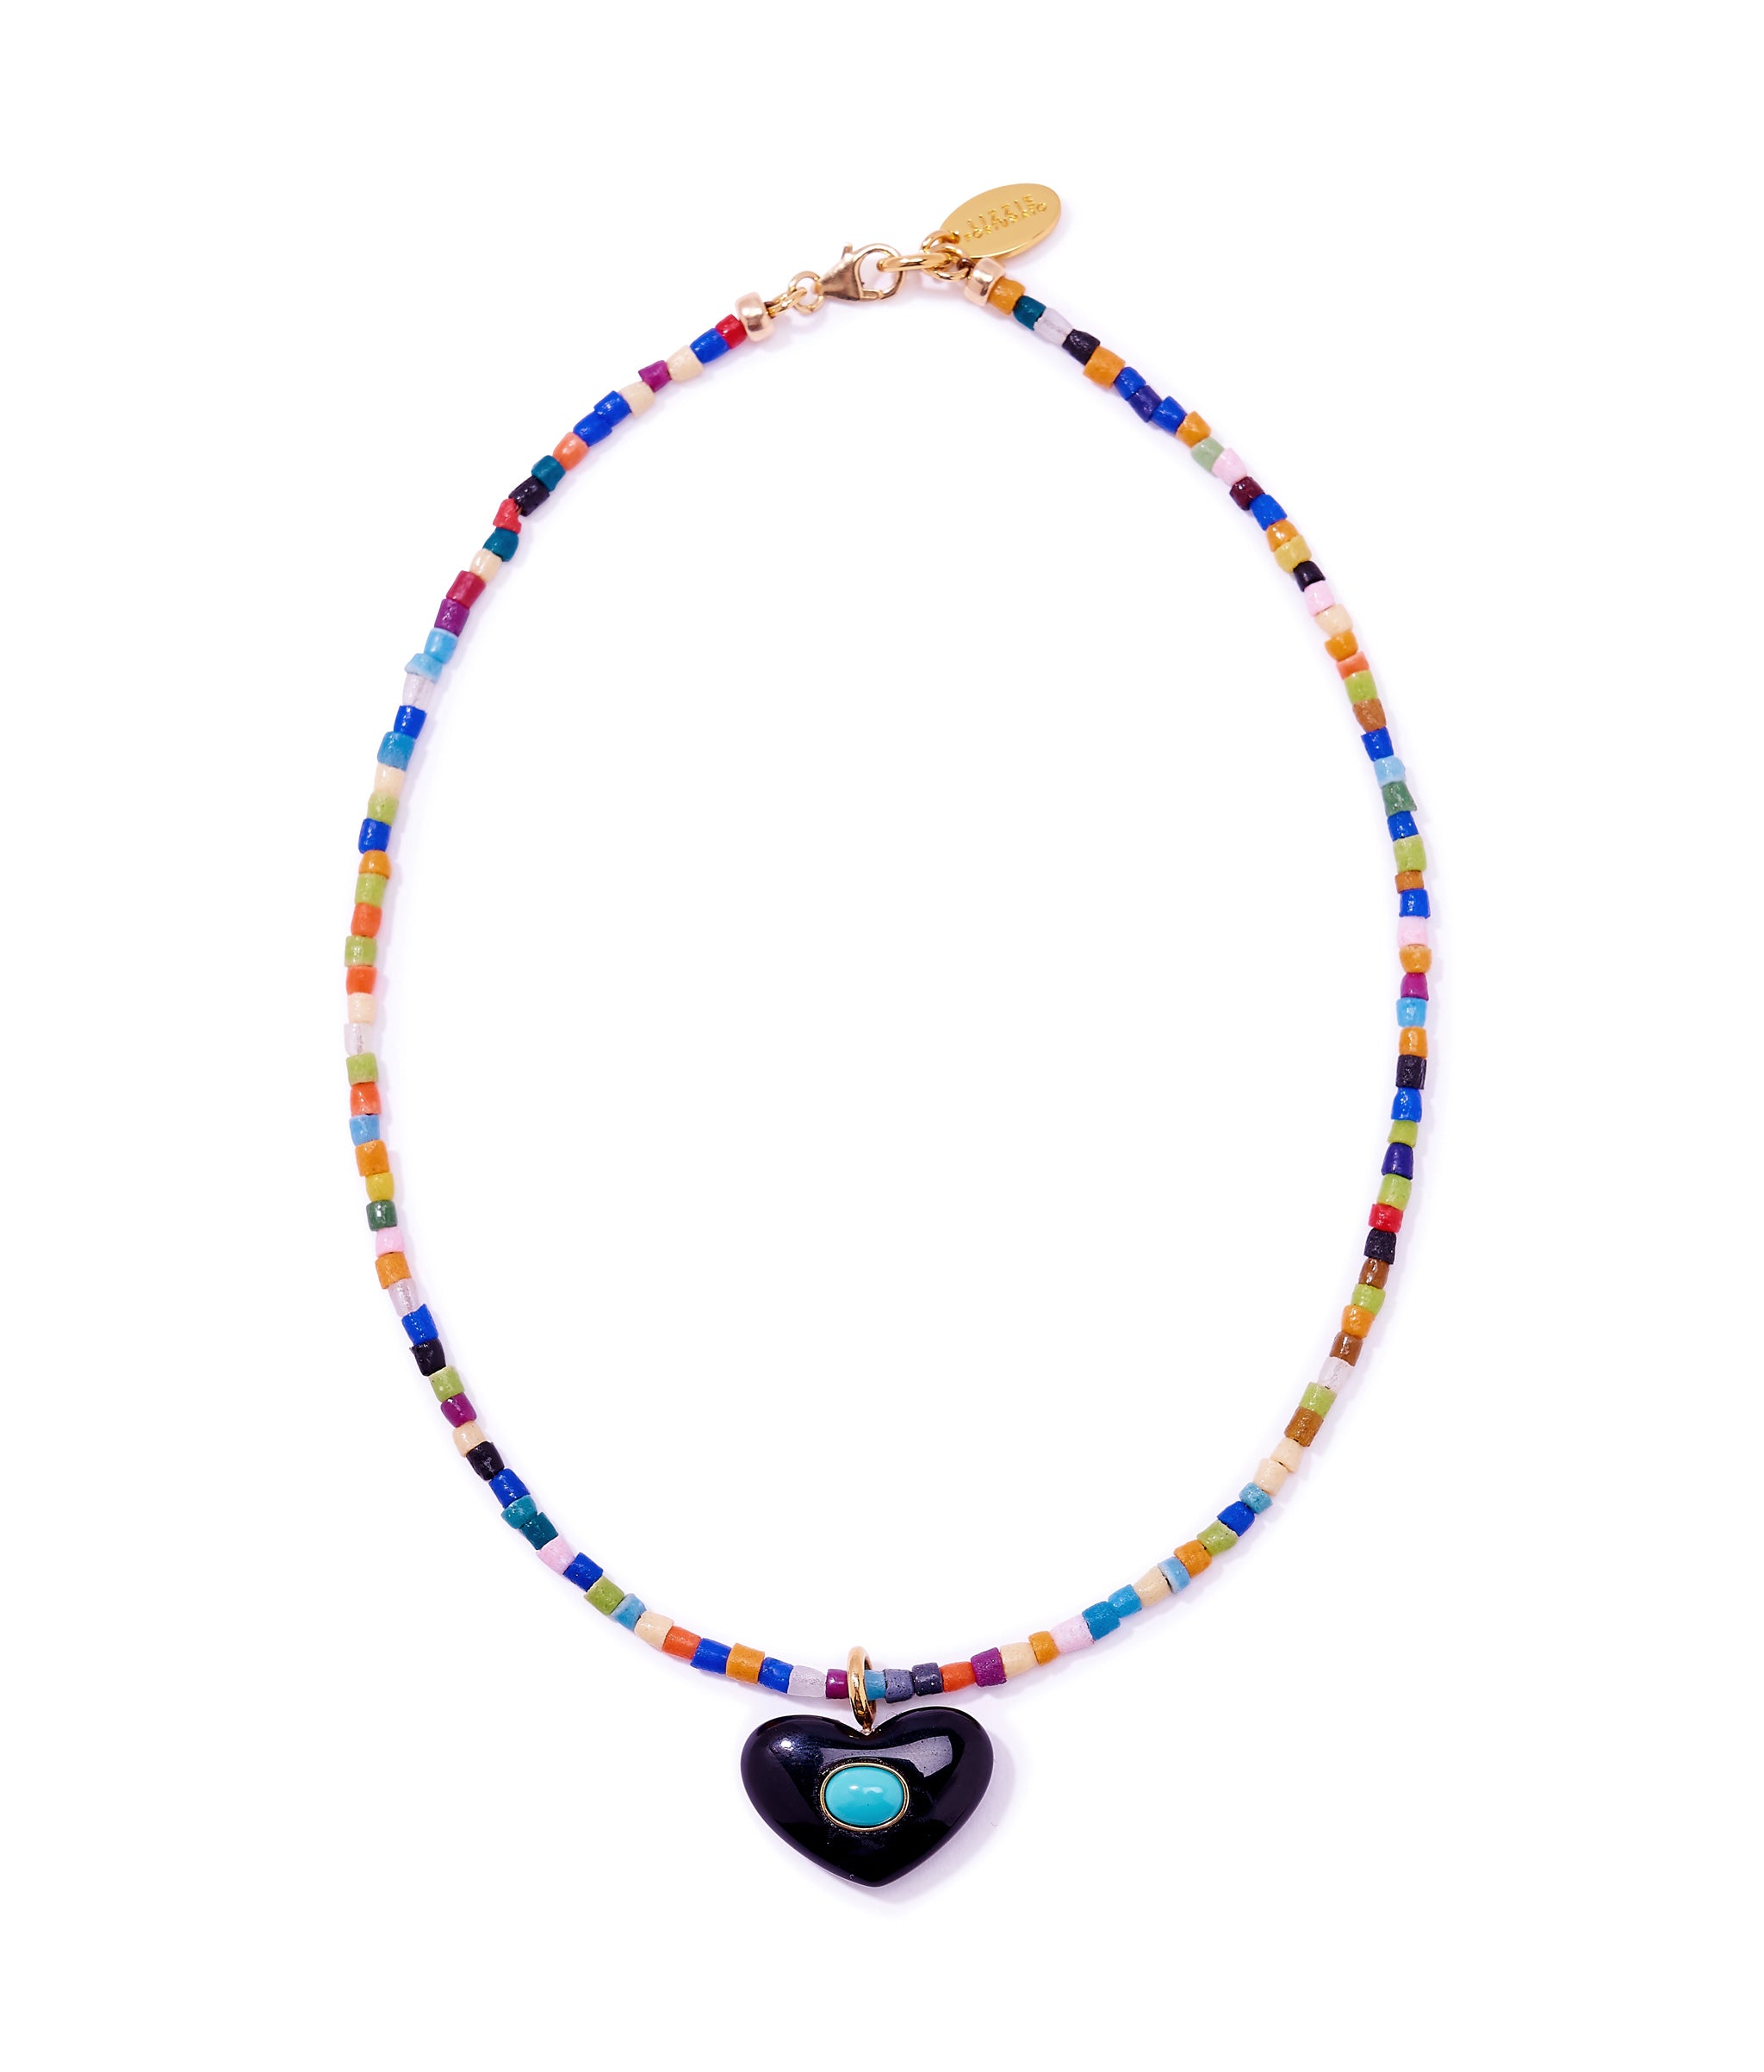 Martina Heart Necklace in Rainbow. Colourful glass seed beads with black agate heart pendant inlaid with turquoise stone